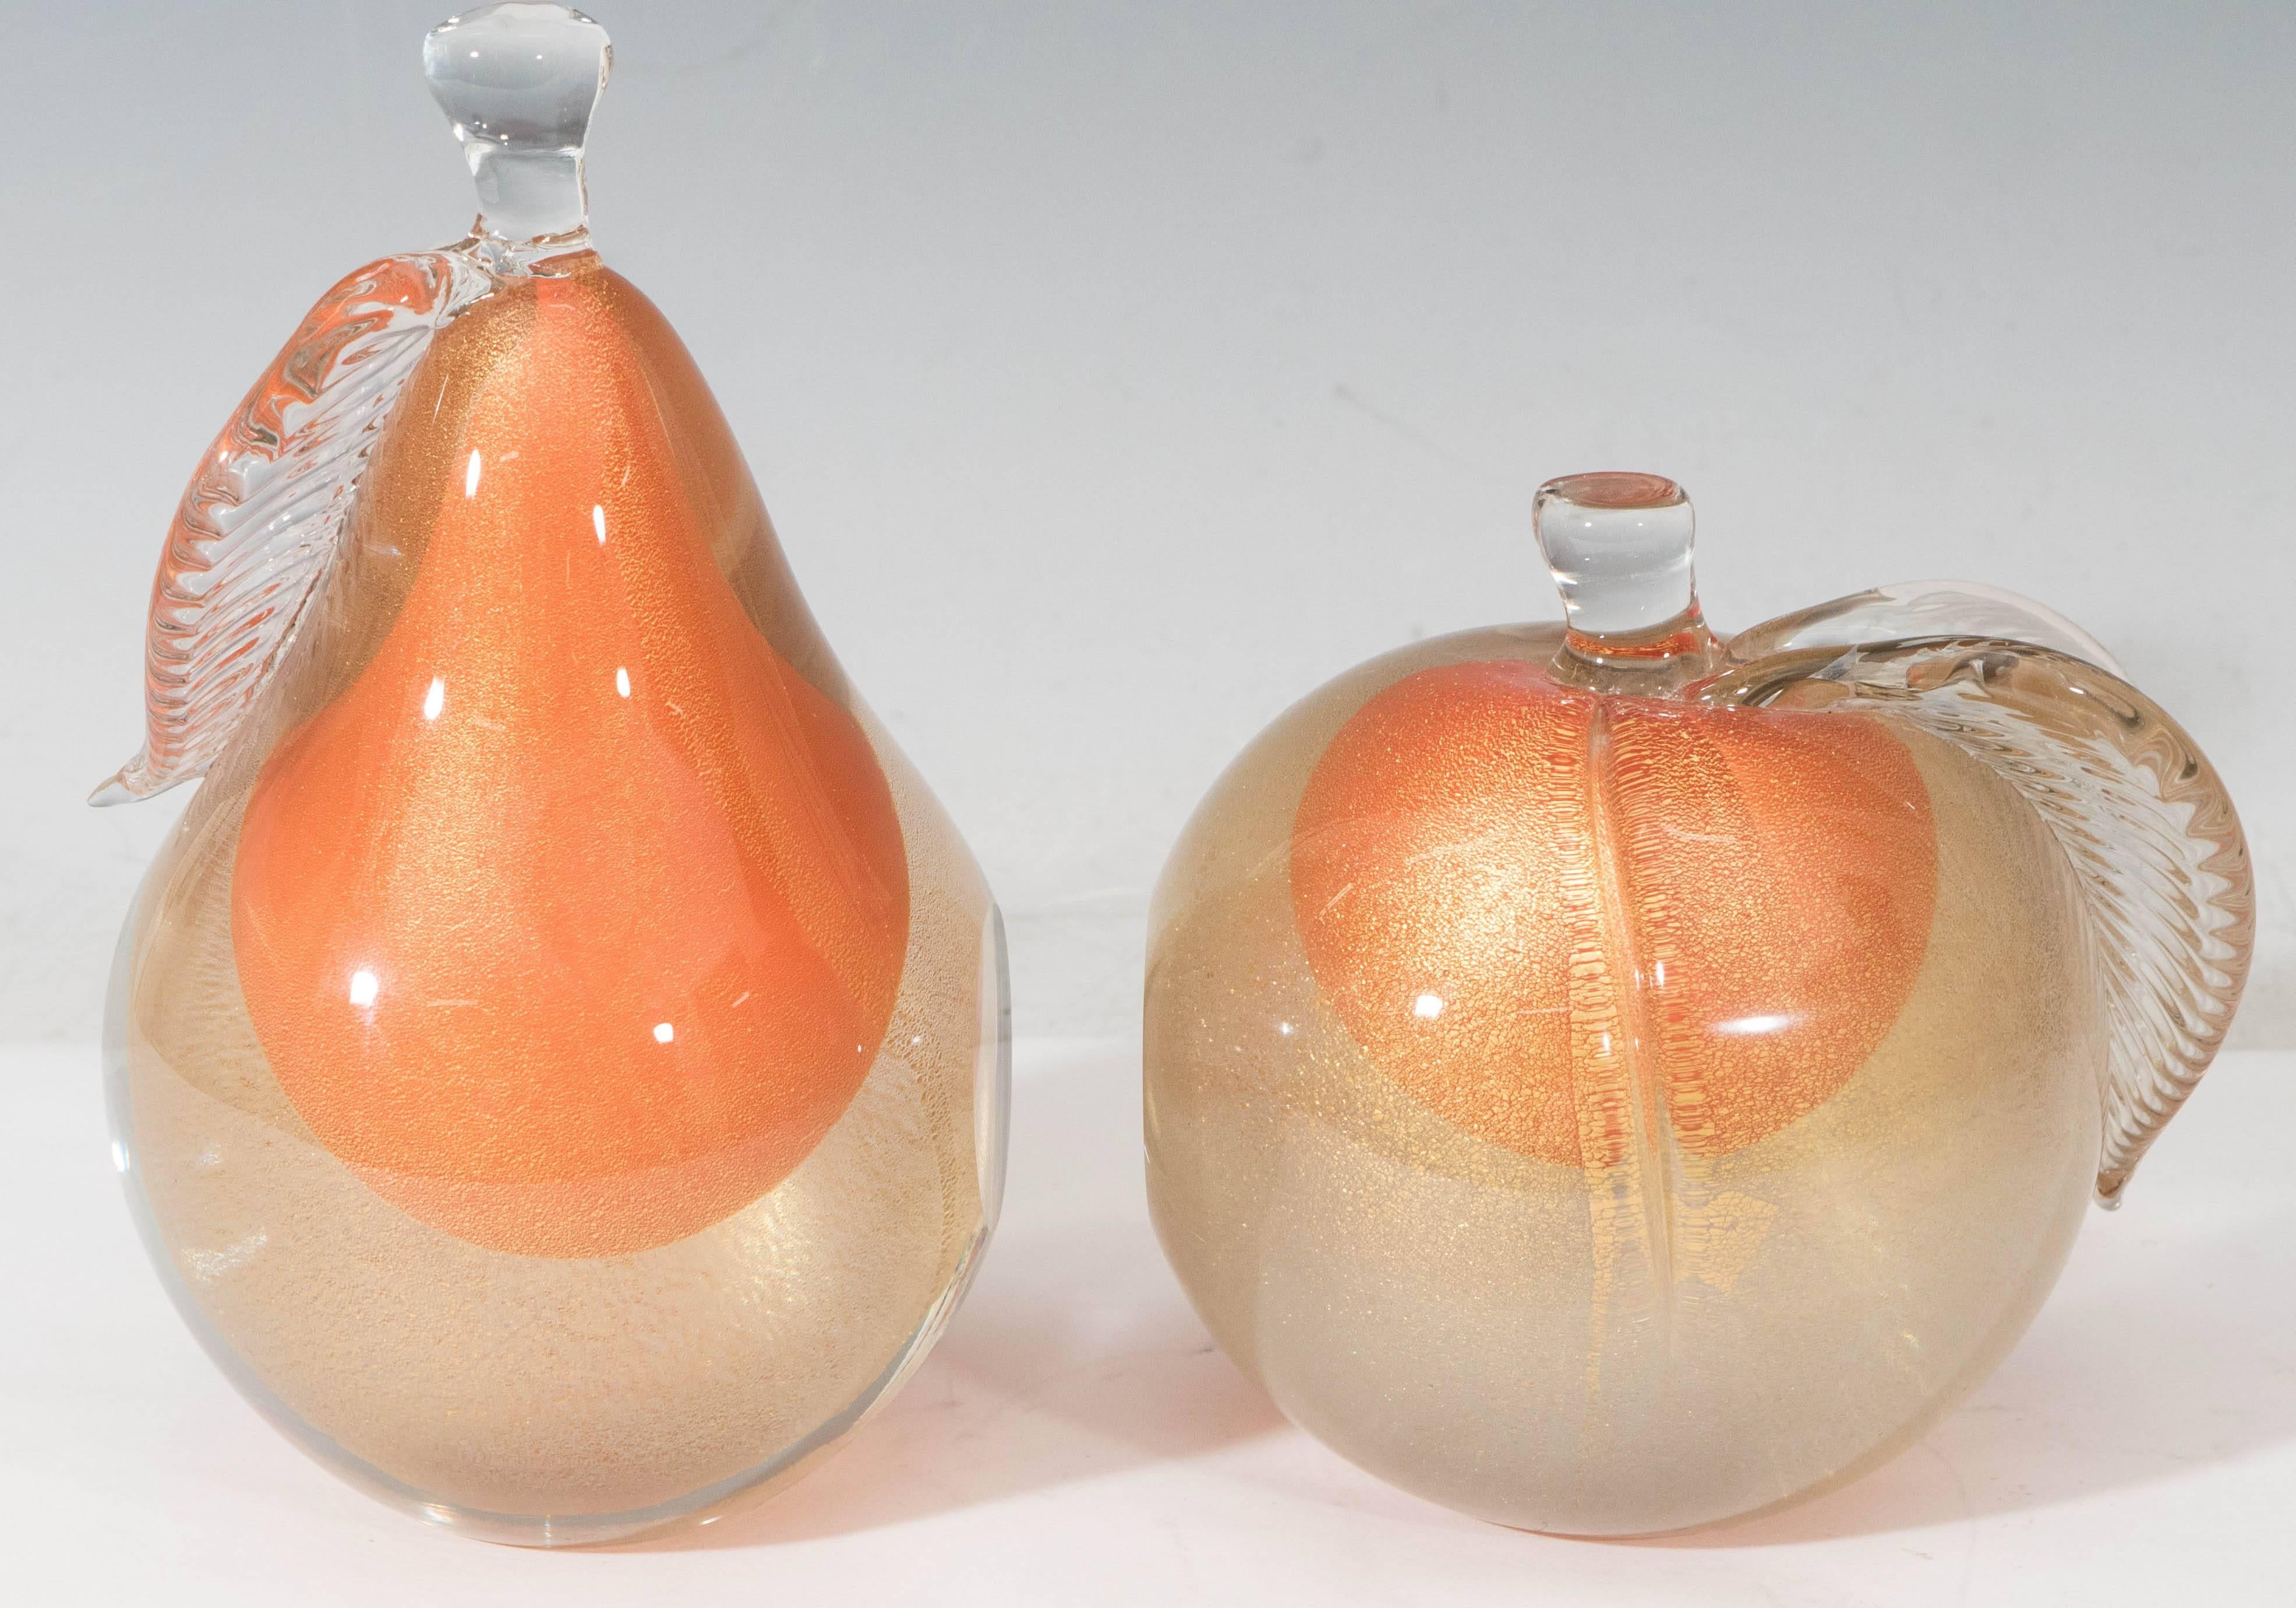 These Italian art glass pear and apple bookends by Alfredo Barbini, produced circa 1950s to 1960s, each come in clear sommerso layer with flecks of gold, over a bright orange toned center; both bodies have a flat polished end, to support books set